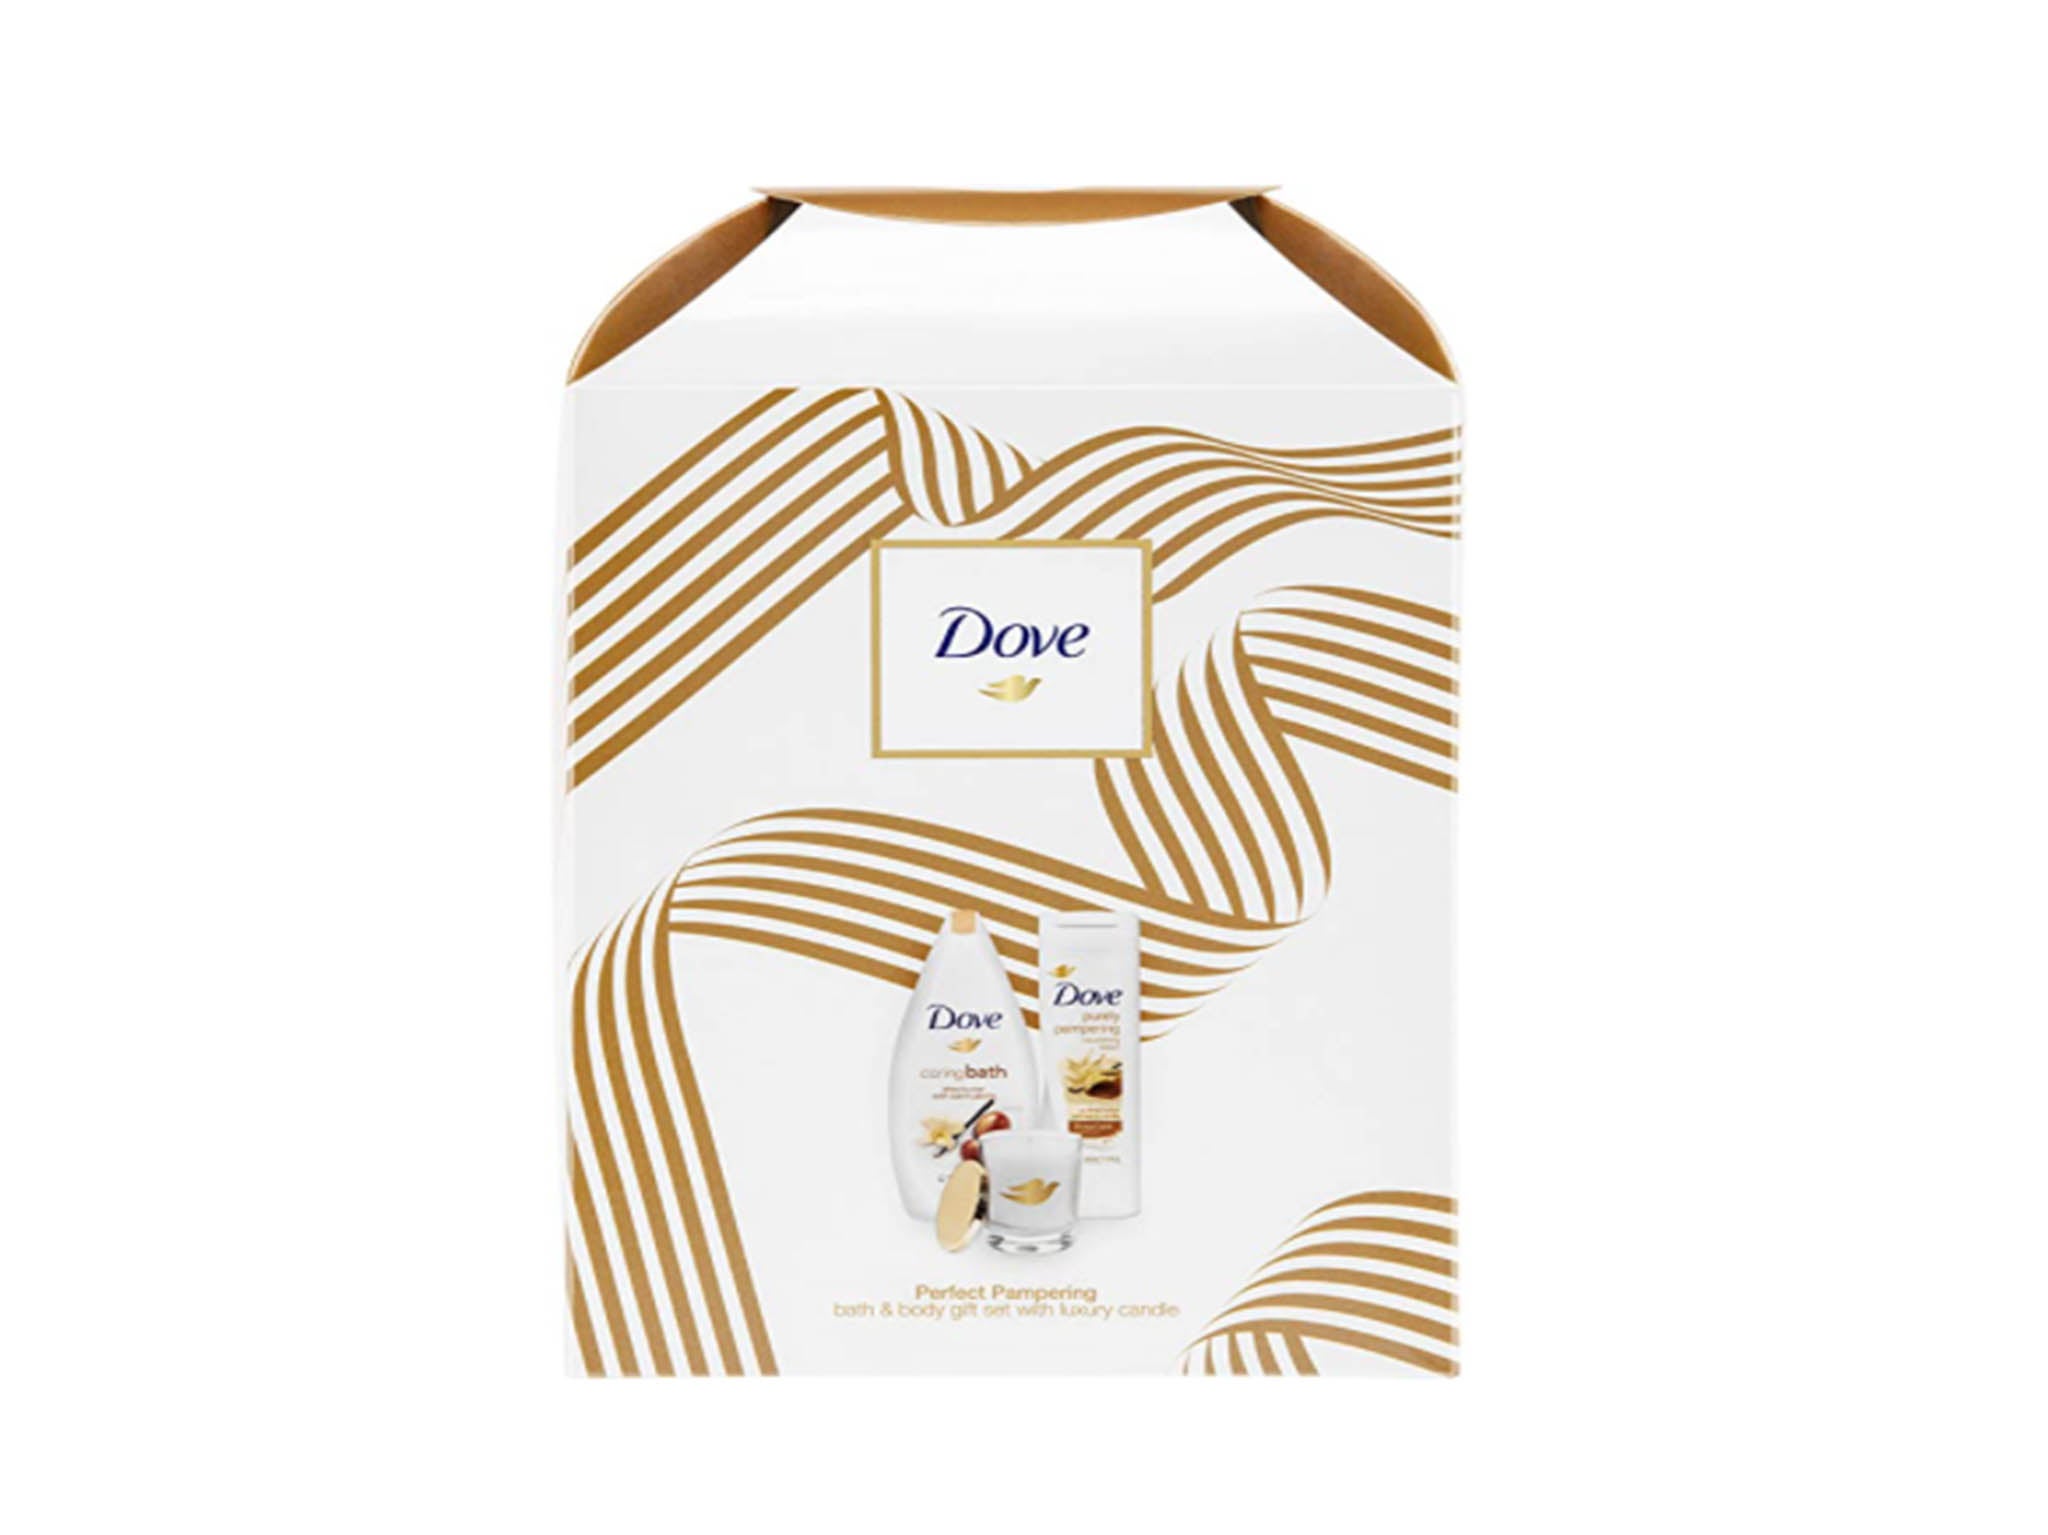 Enjoy some downtime with this Dove bath soak set